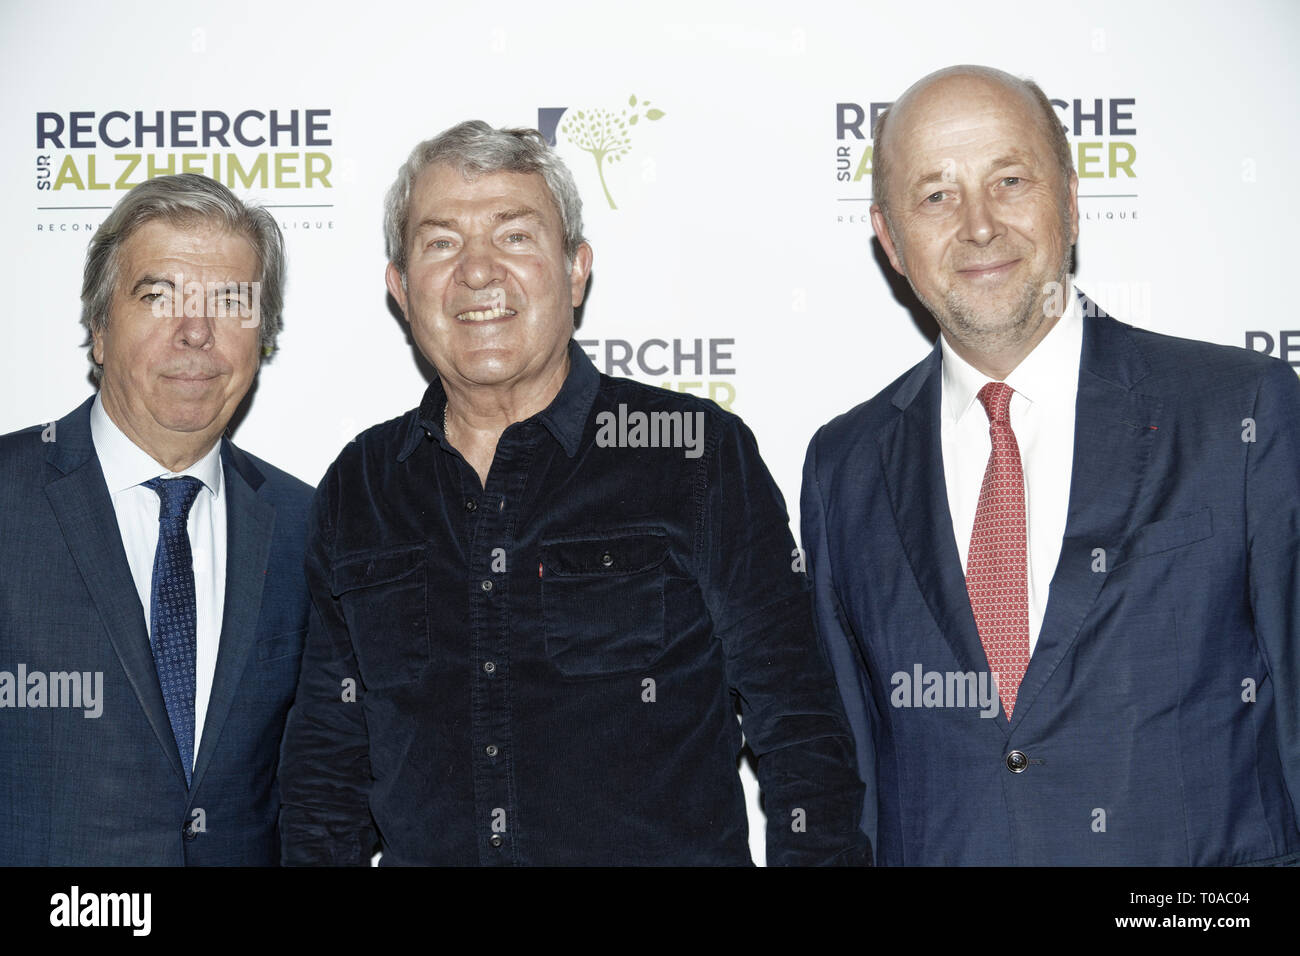 Paris, France. 18th Mar 2019. Pr Bruno Dubois (L), Martin Lamotte and Olivier De Ladoucette (R) - Photocall of the 14th Gala 2019 of the Association for Alzheimer Research at the Olympia in Paris on March 18, 2019. Credit: Véronique PHITOUSSI/Alamy Live News Stock Photo